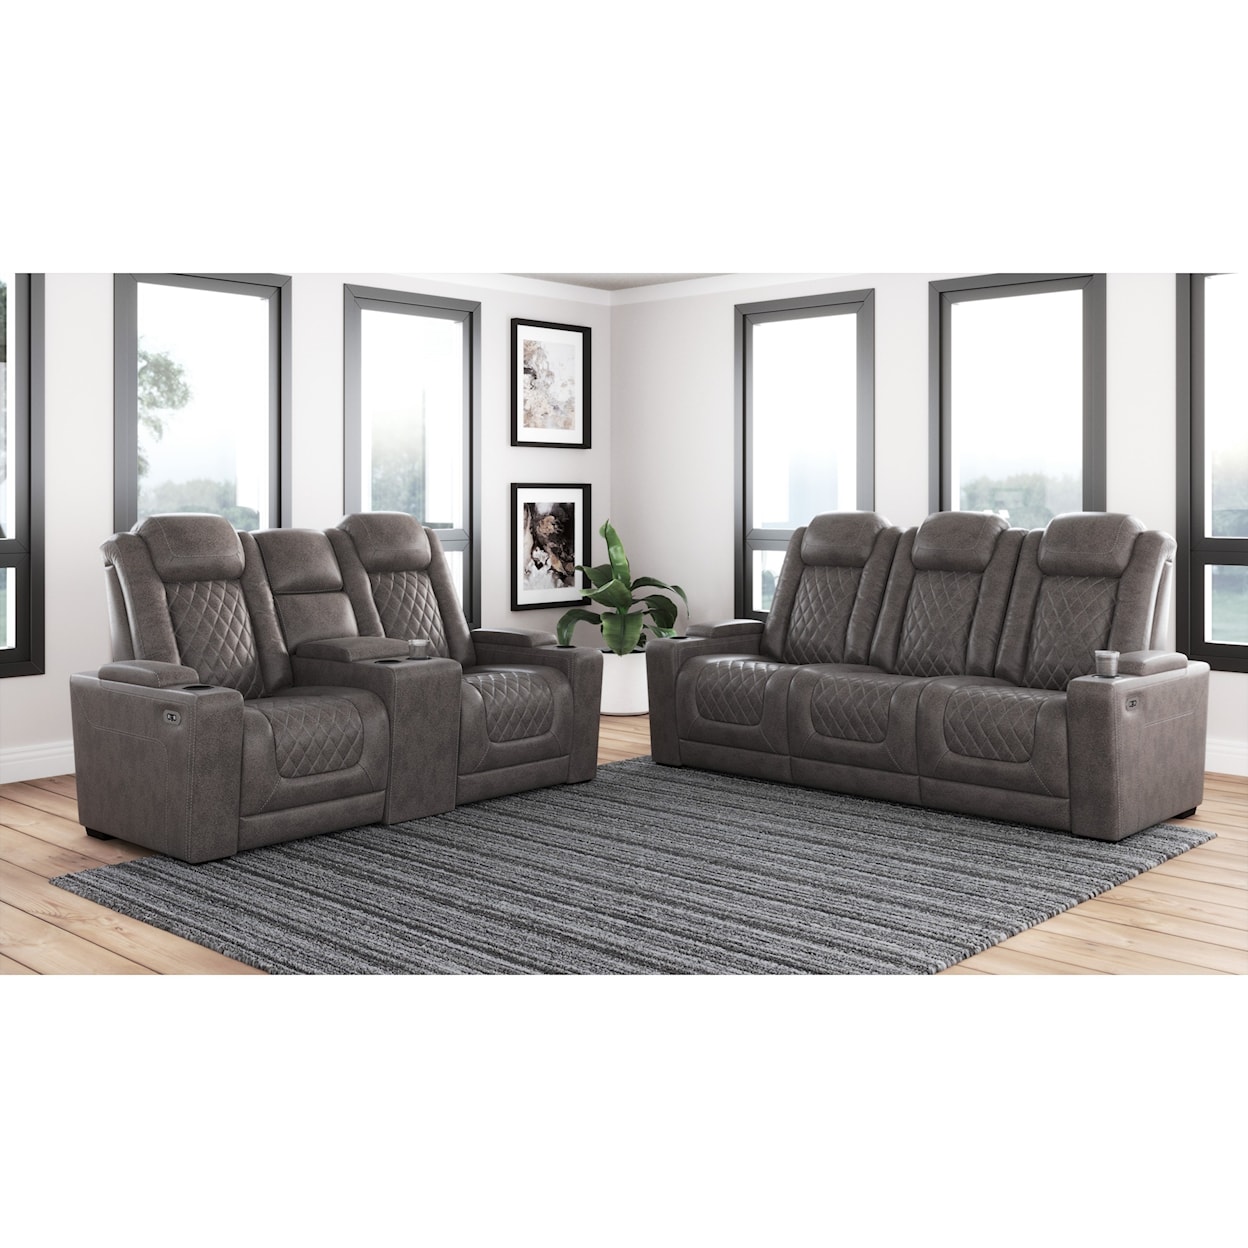 Benchcraft Hyllmont Power Reclining Living Room Group